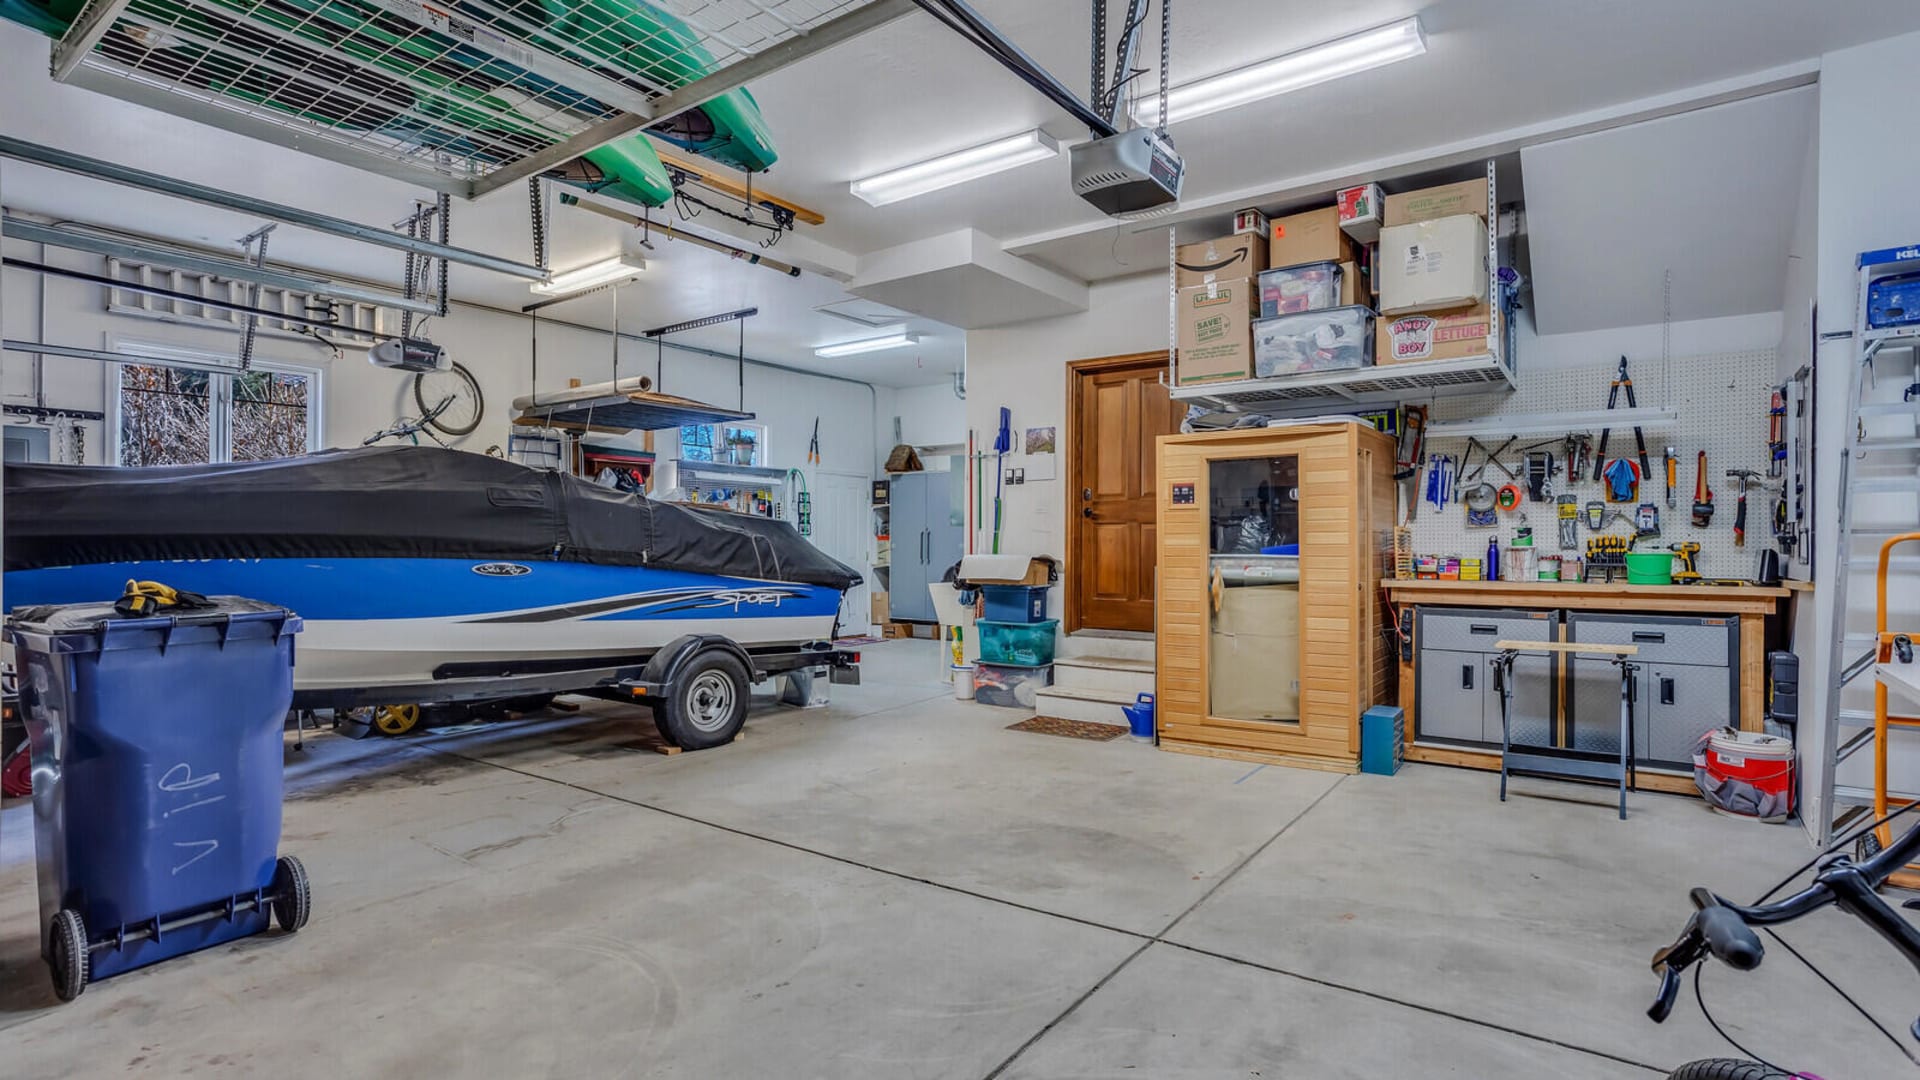 Huge 3 car garage for all the toys